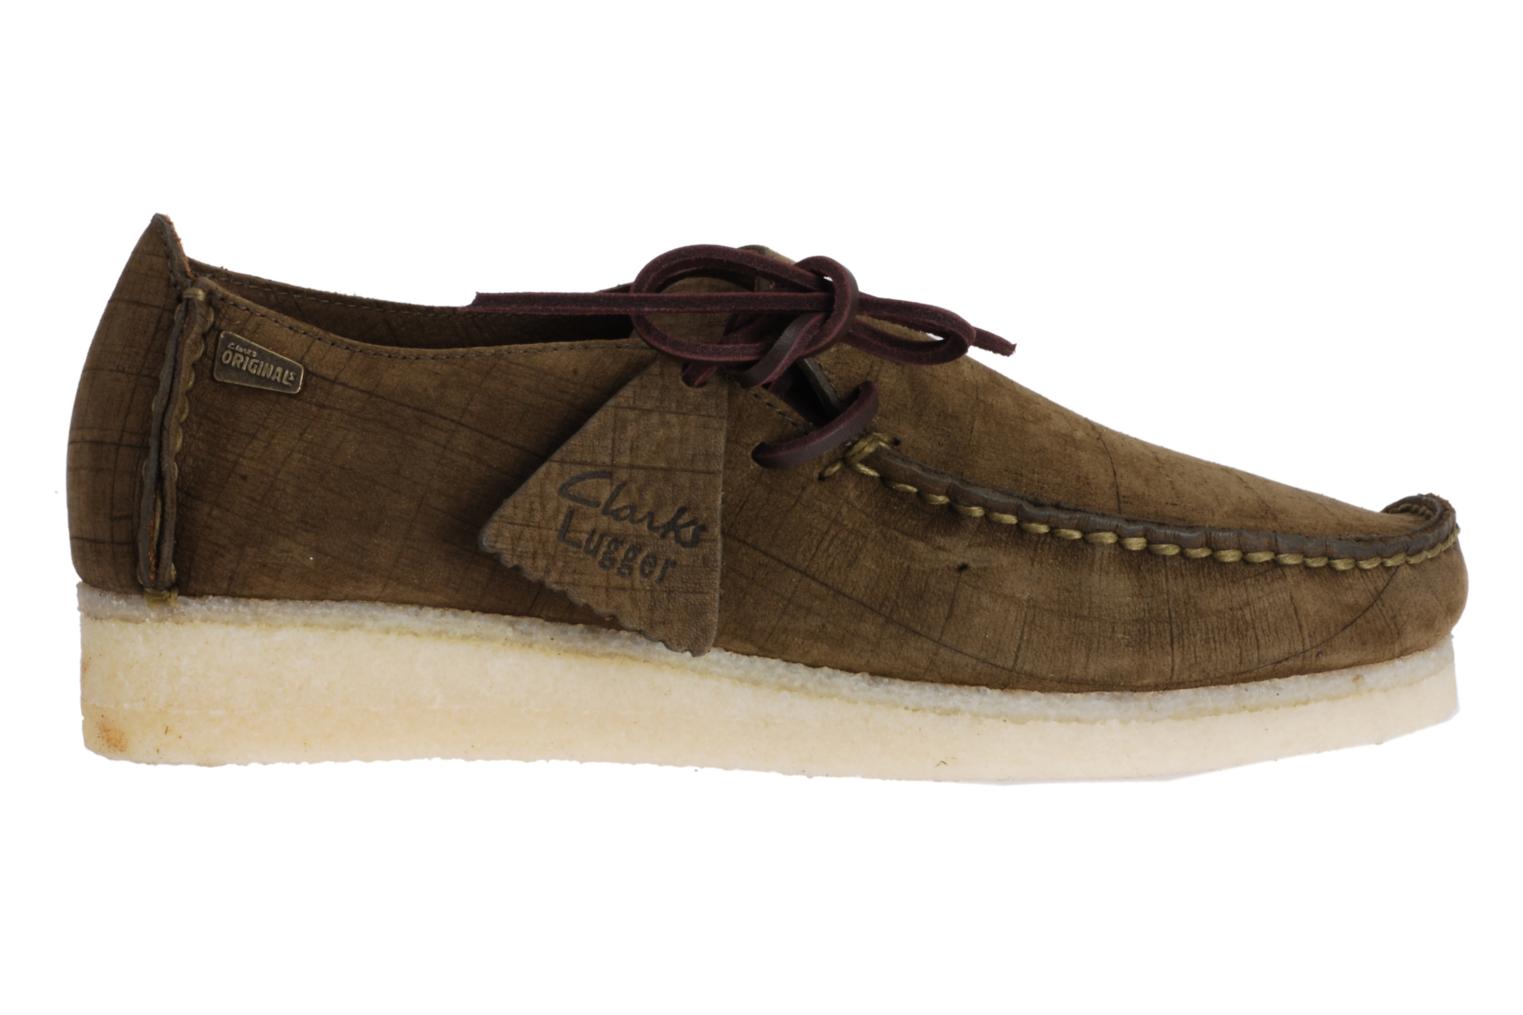 Clarks Originals Lugger Lace-up shoes in Brown at Sarenza.co.uk (21858)